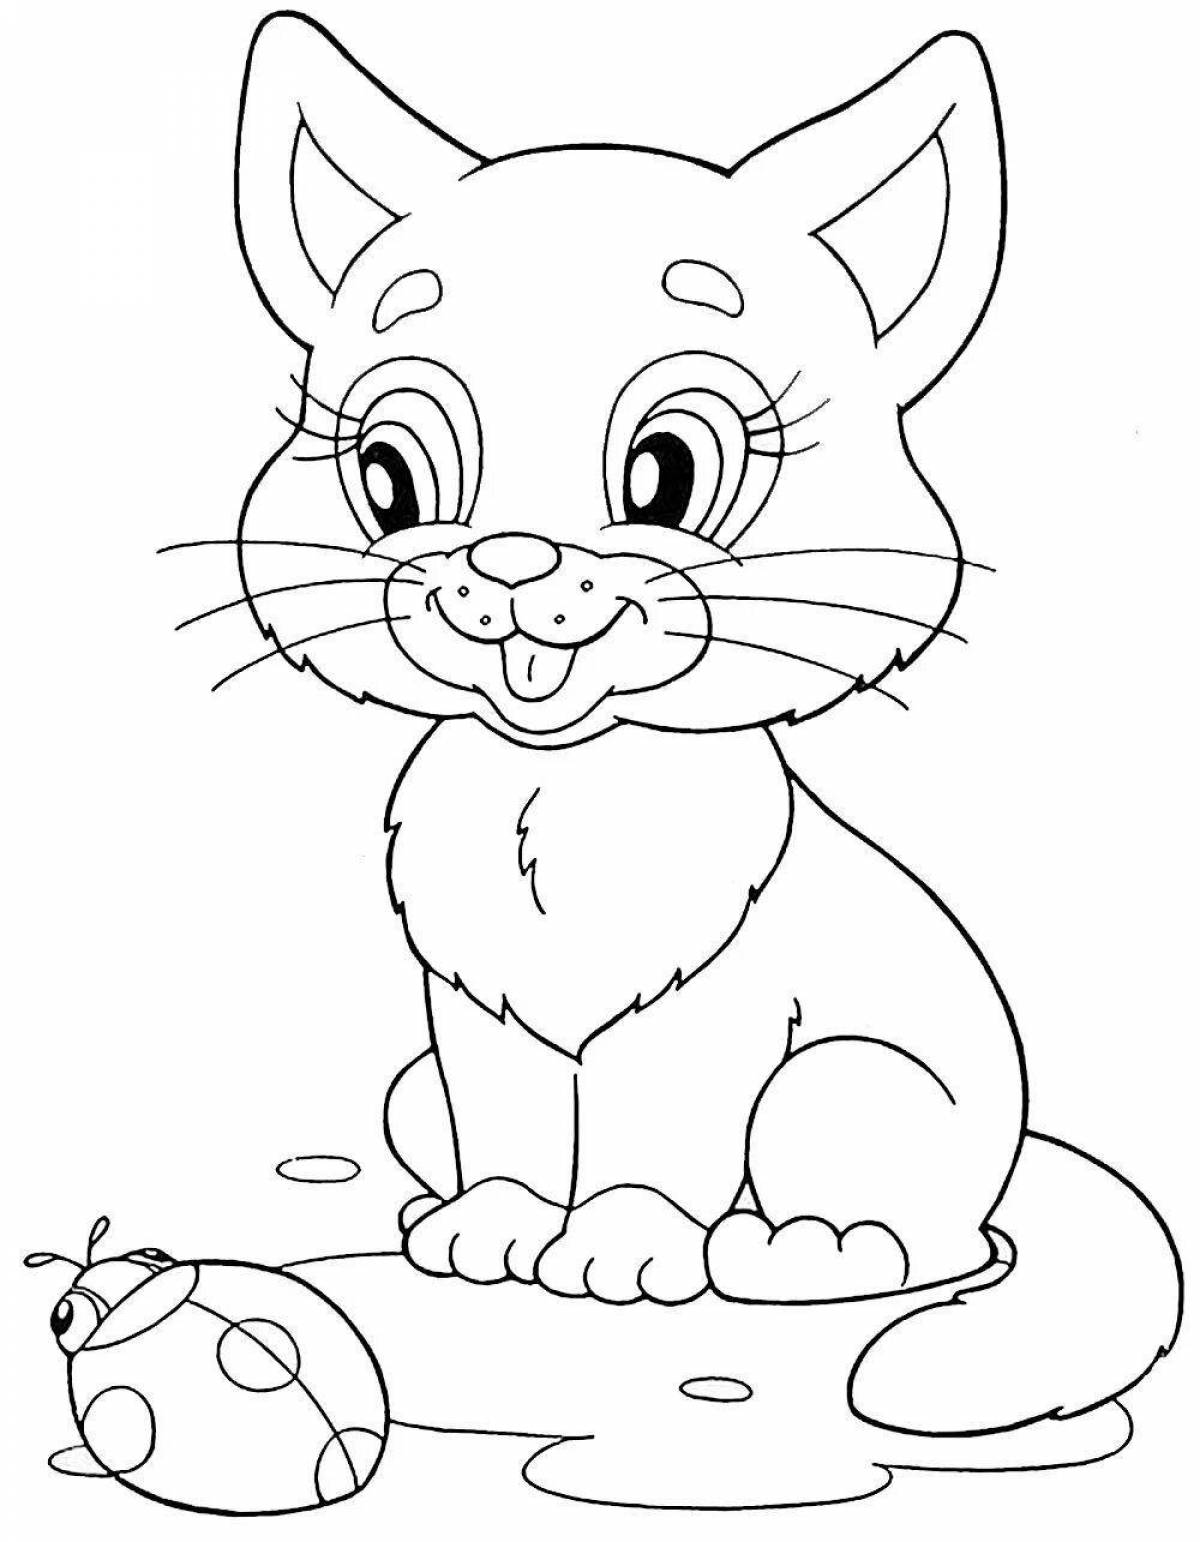 Coloring book for children 5-6 years old cats